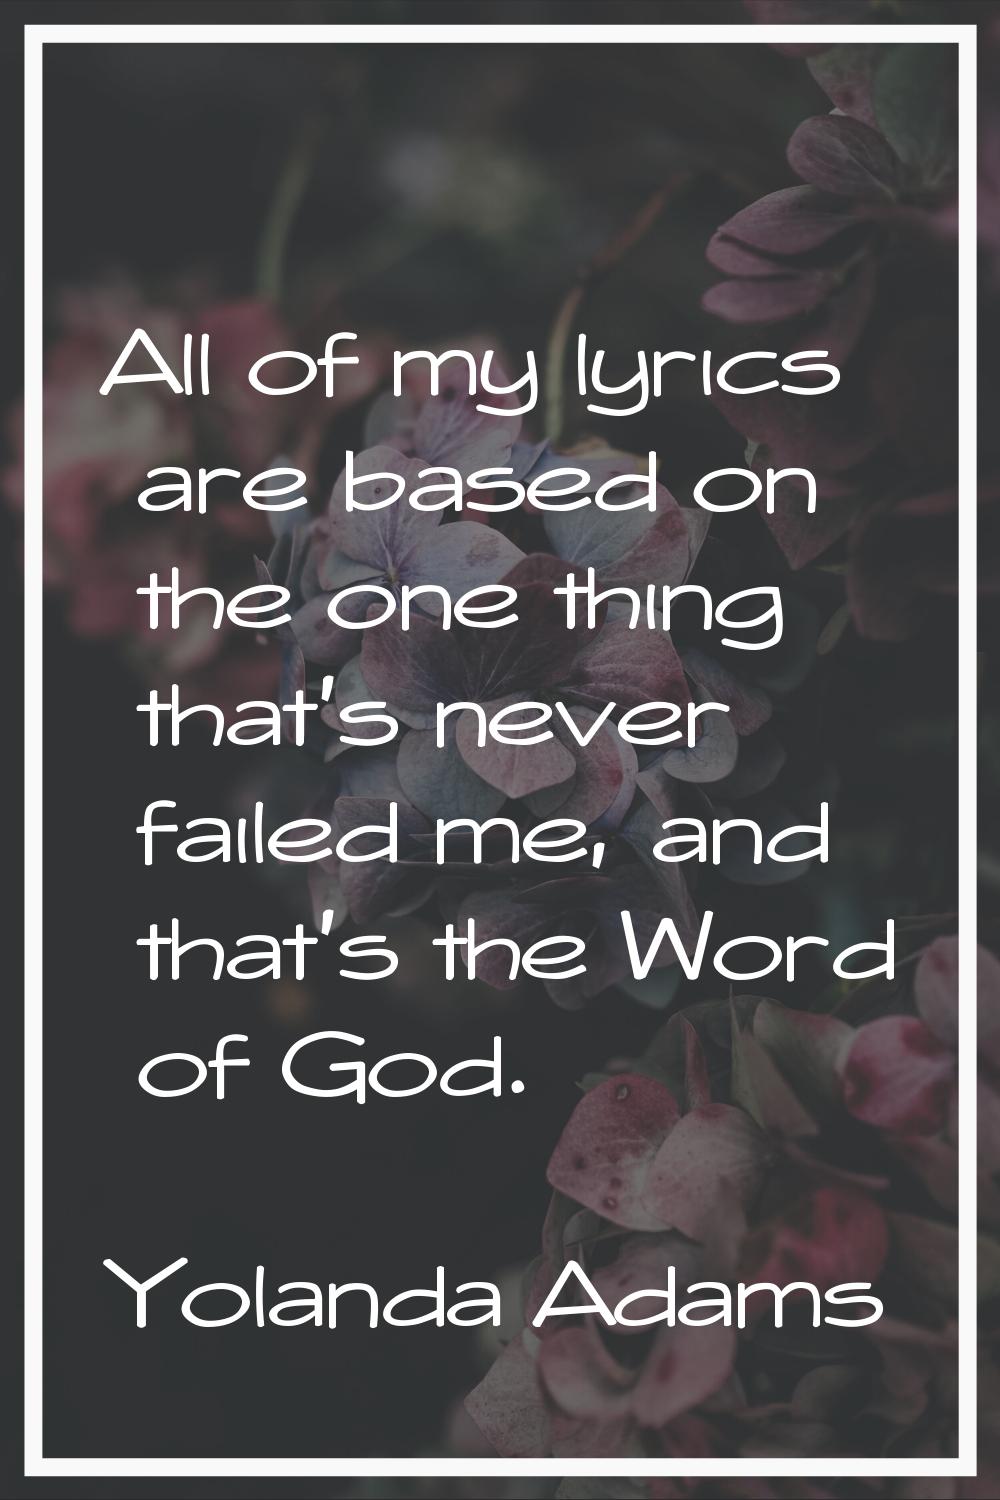 All of my lyrics are based on the one thing that's never failed me, and that's the Word of God.